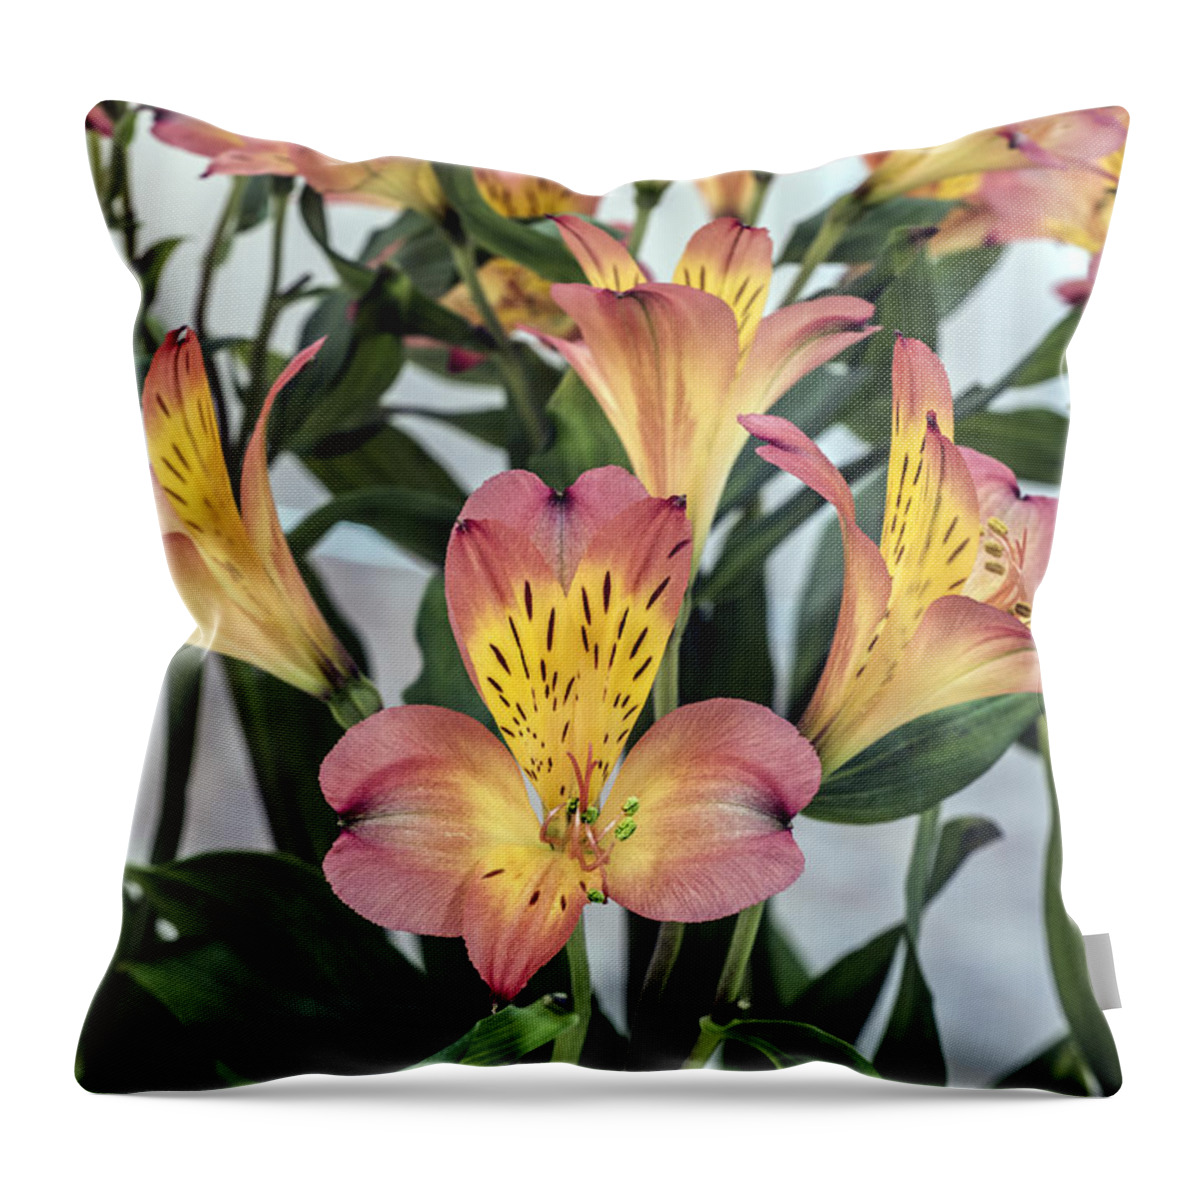 Flower Throw Pillow featuring the photograph Alstroemeria Blossoms by William Bitman